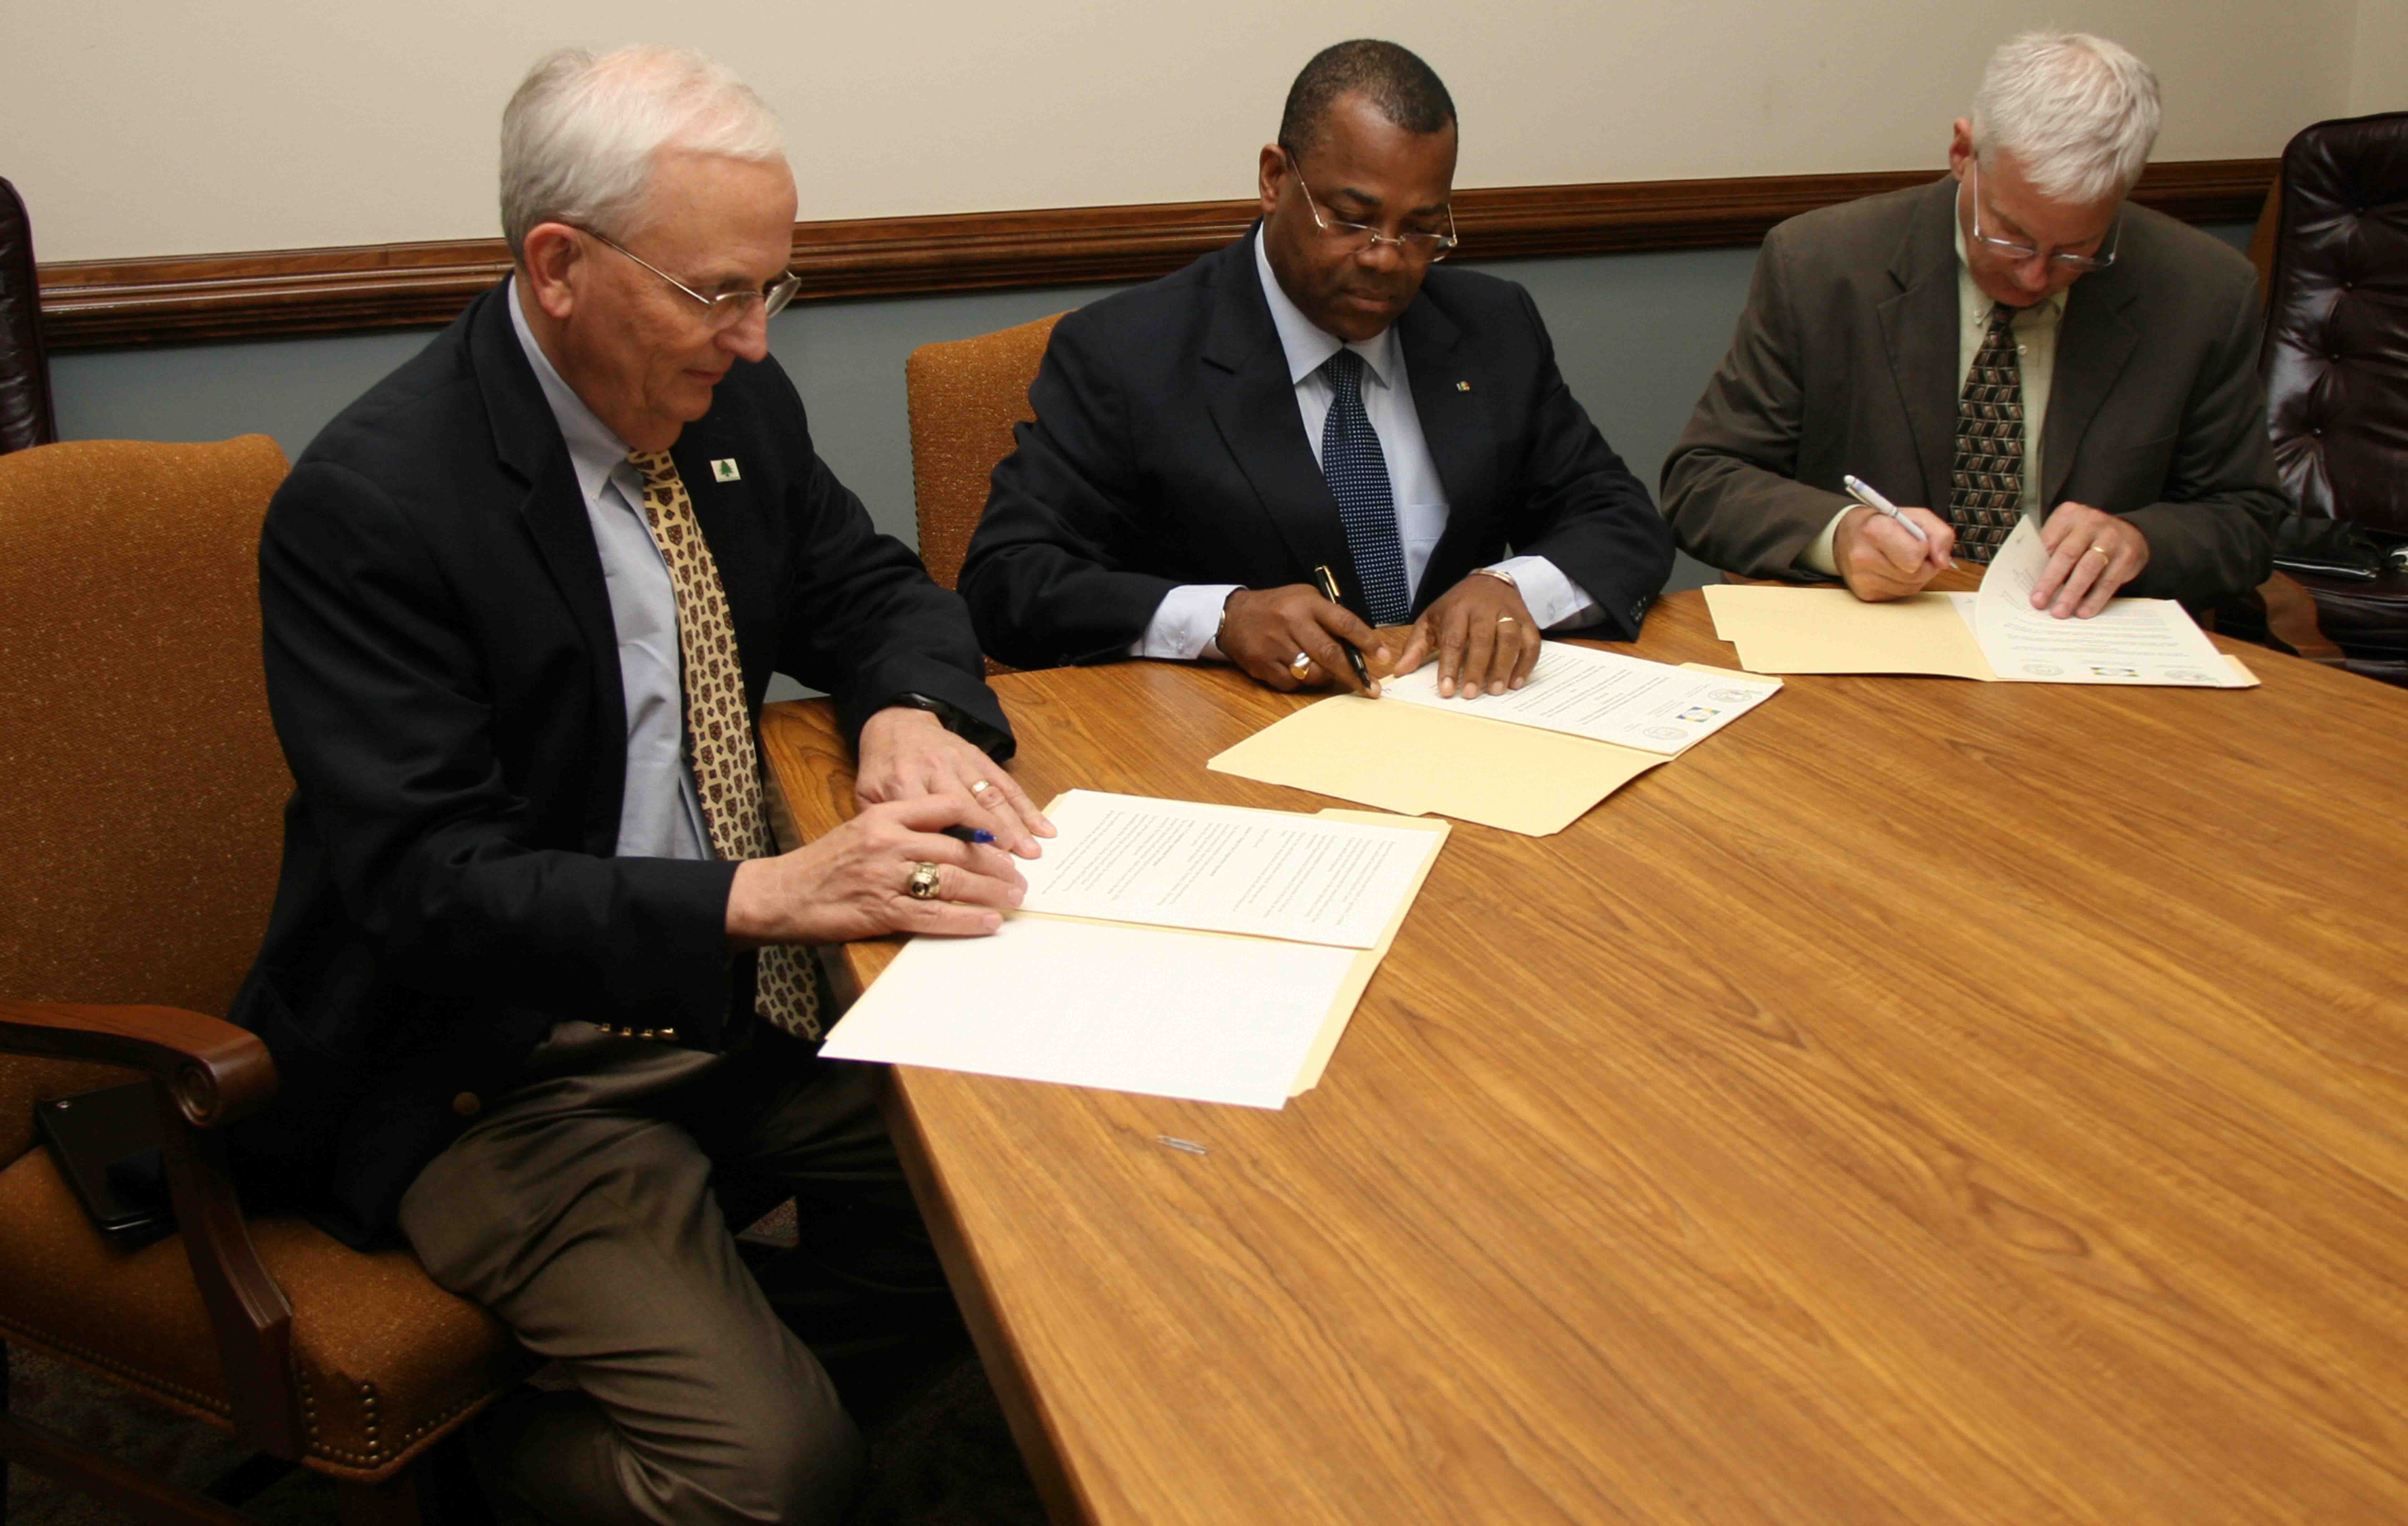 Georgia Commissioner of Agriculture Gary Black, Gabon's Minister of Agriculture, Livestock Fisheries and Rural Development, Julien Nkoghe-Bekale and UGA College of Agriculture and Environmental Sciences Dean J. Scott Angle sign an agreement promising future cooperation on agricultural development projects on Nov. 20.